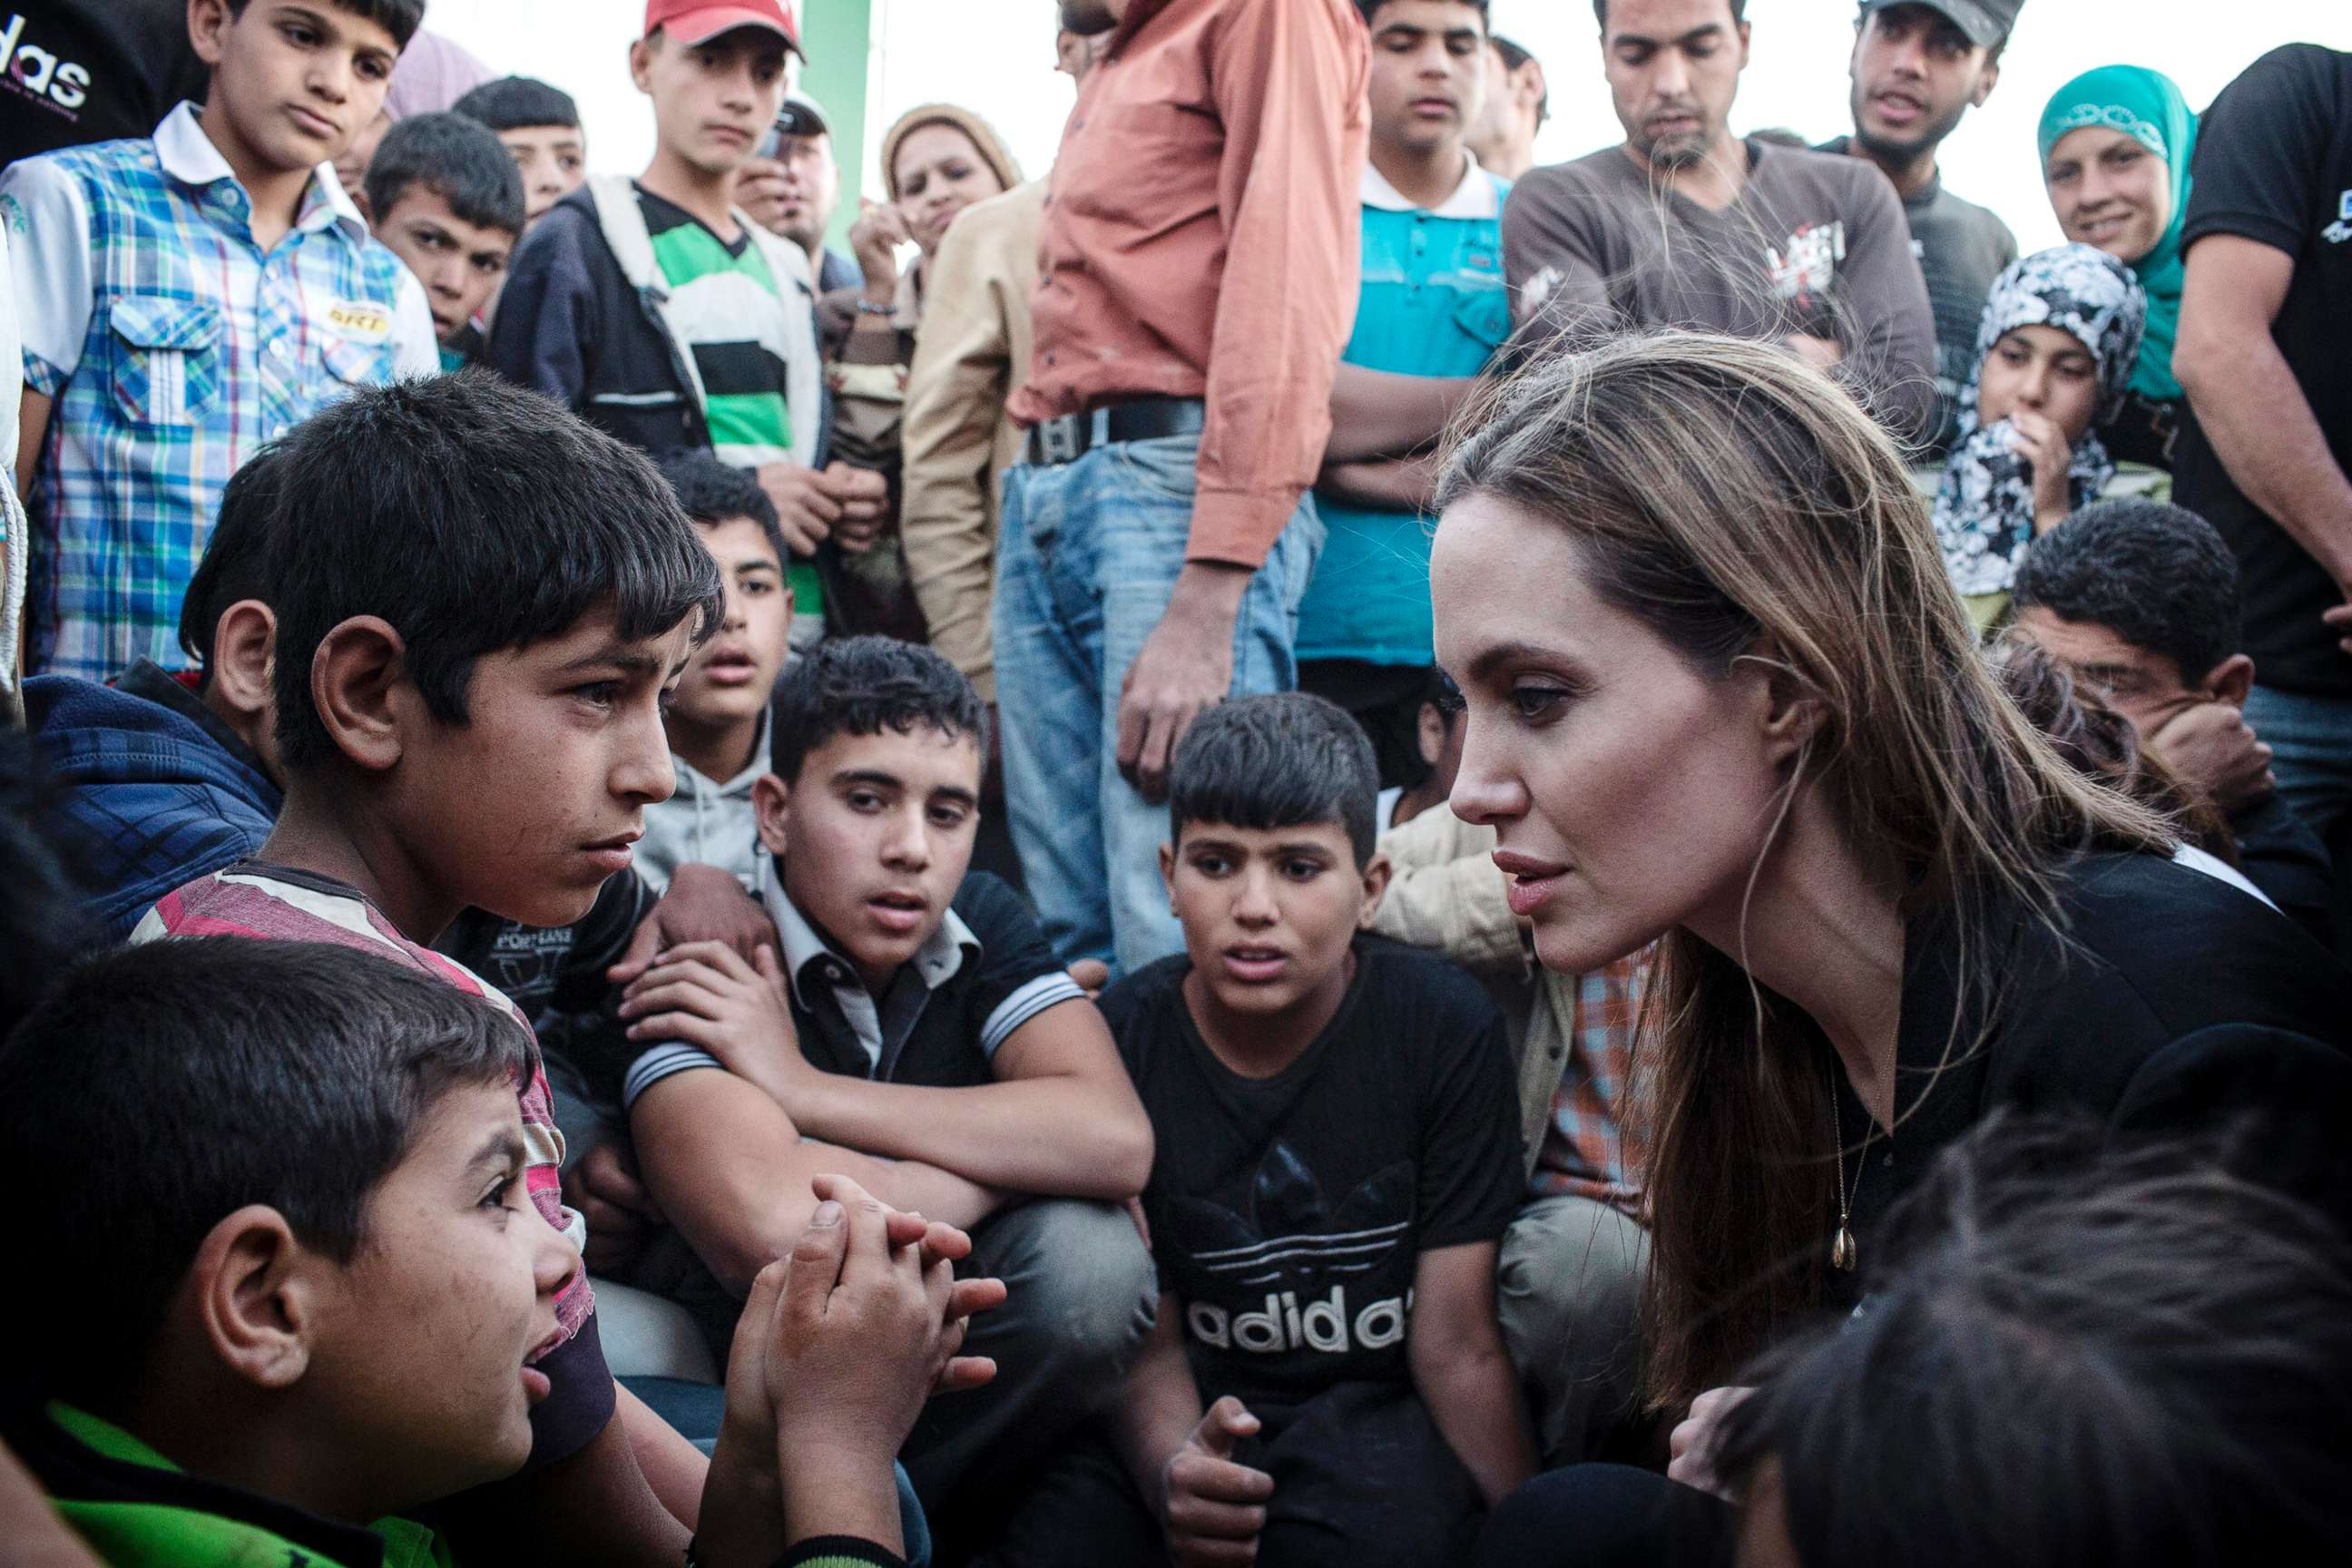 PHOTO: UNHCR Special Envoy Angelina Jolie speaks with Syrian refugees in a Jordanian military camp based near the Syria/Jordan border, June 18, 2013.